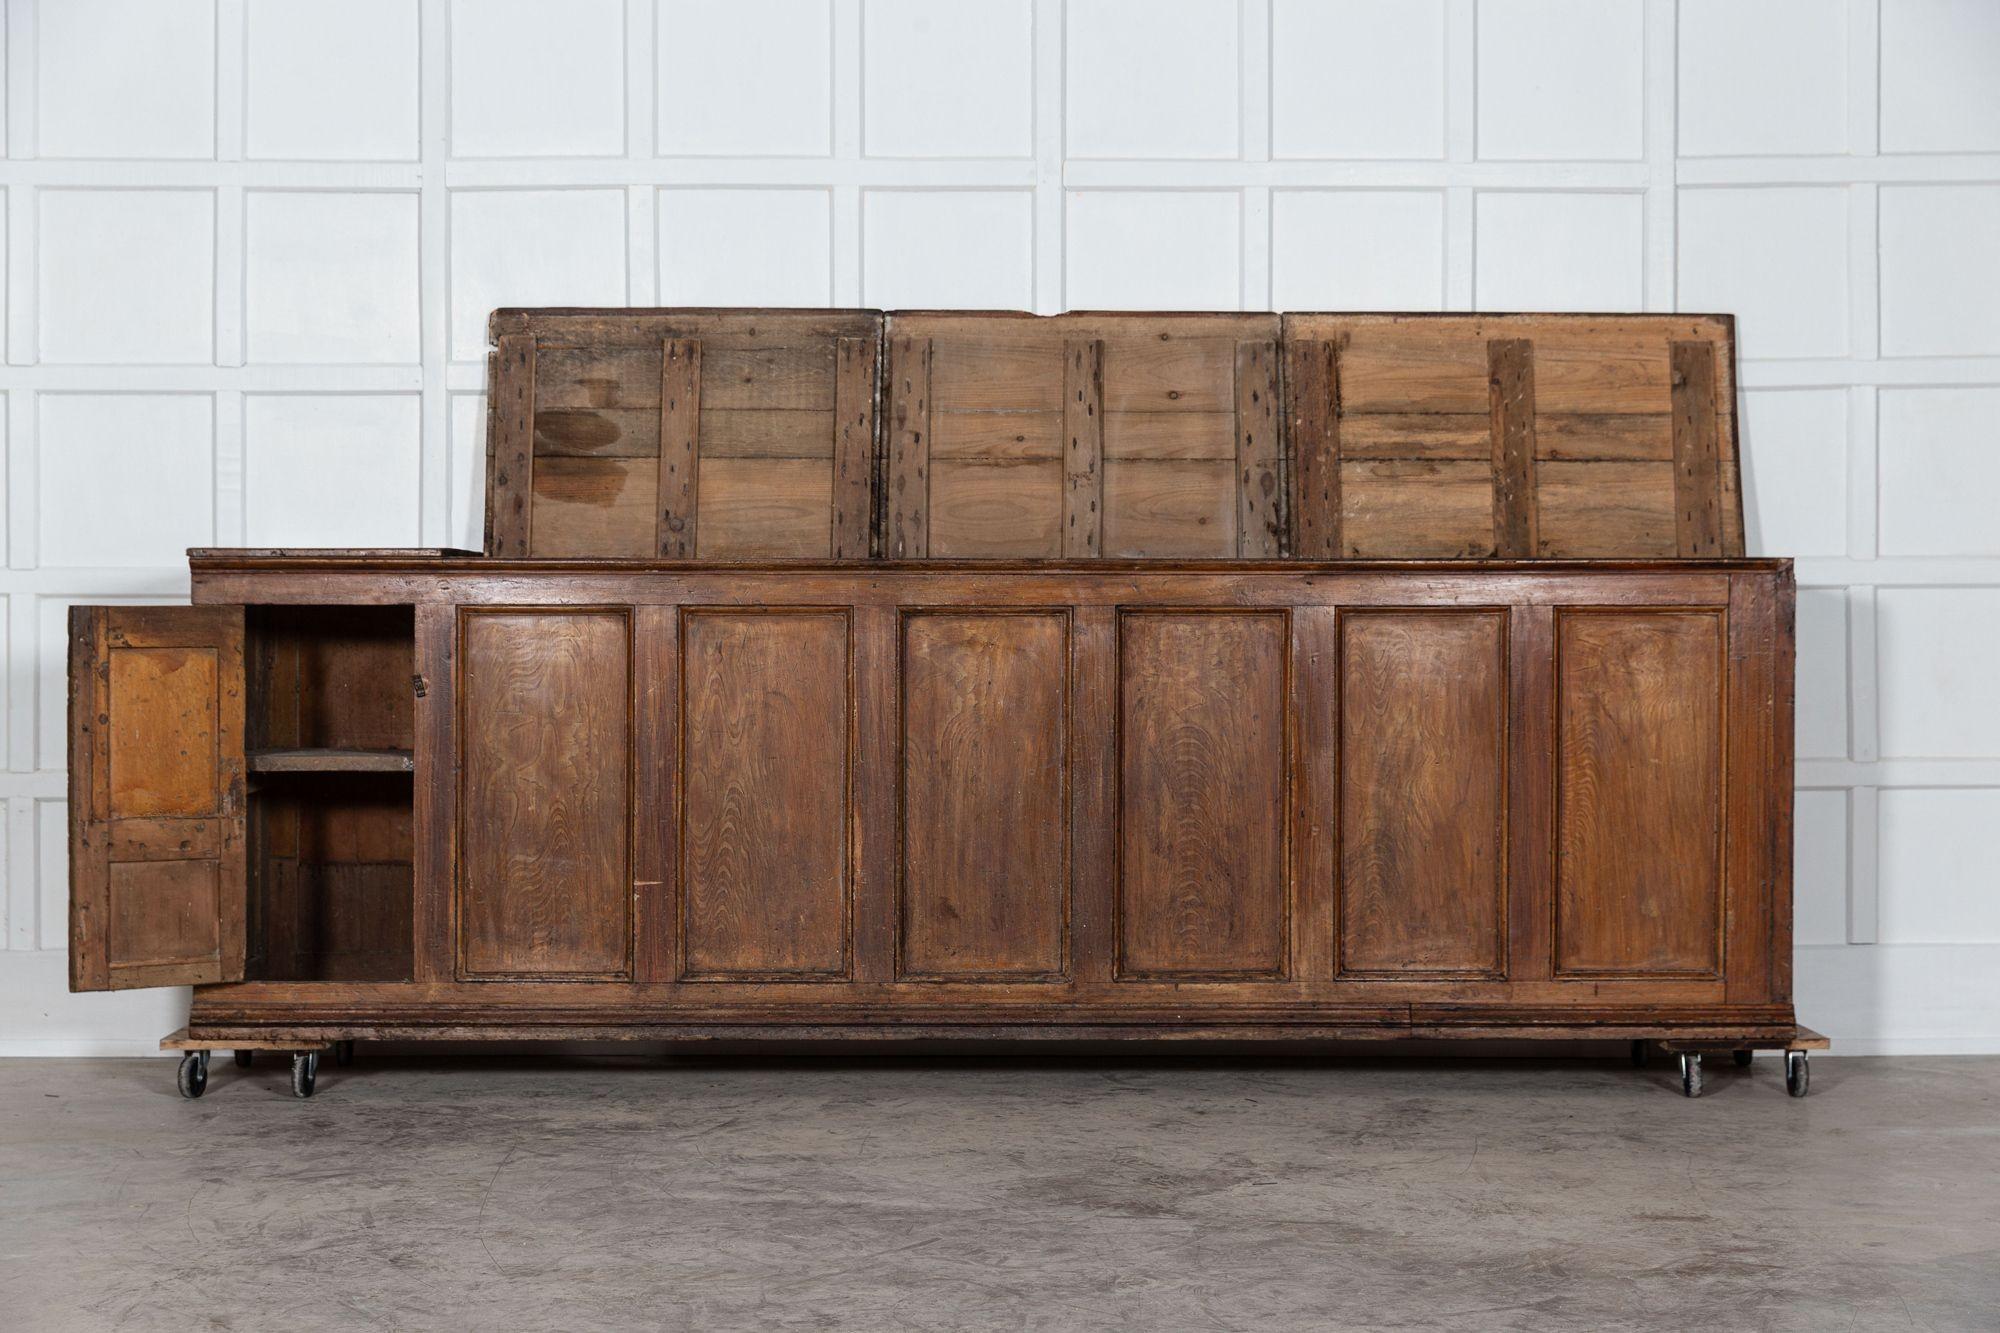 circa 1820
Monumental pine Georgian Welsh farm house grain chest counter.
Provenance: Large Farm Estate - Anglesey, North Wales.
An outstanding rare example with its form, scale and grained paintwork on the open market for the first time in its